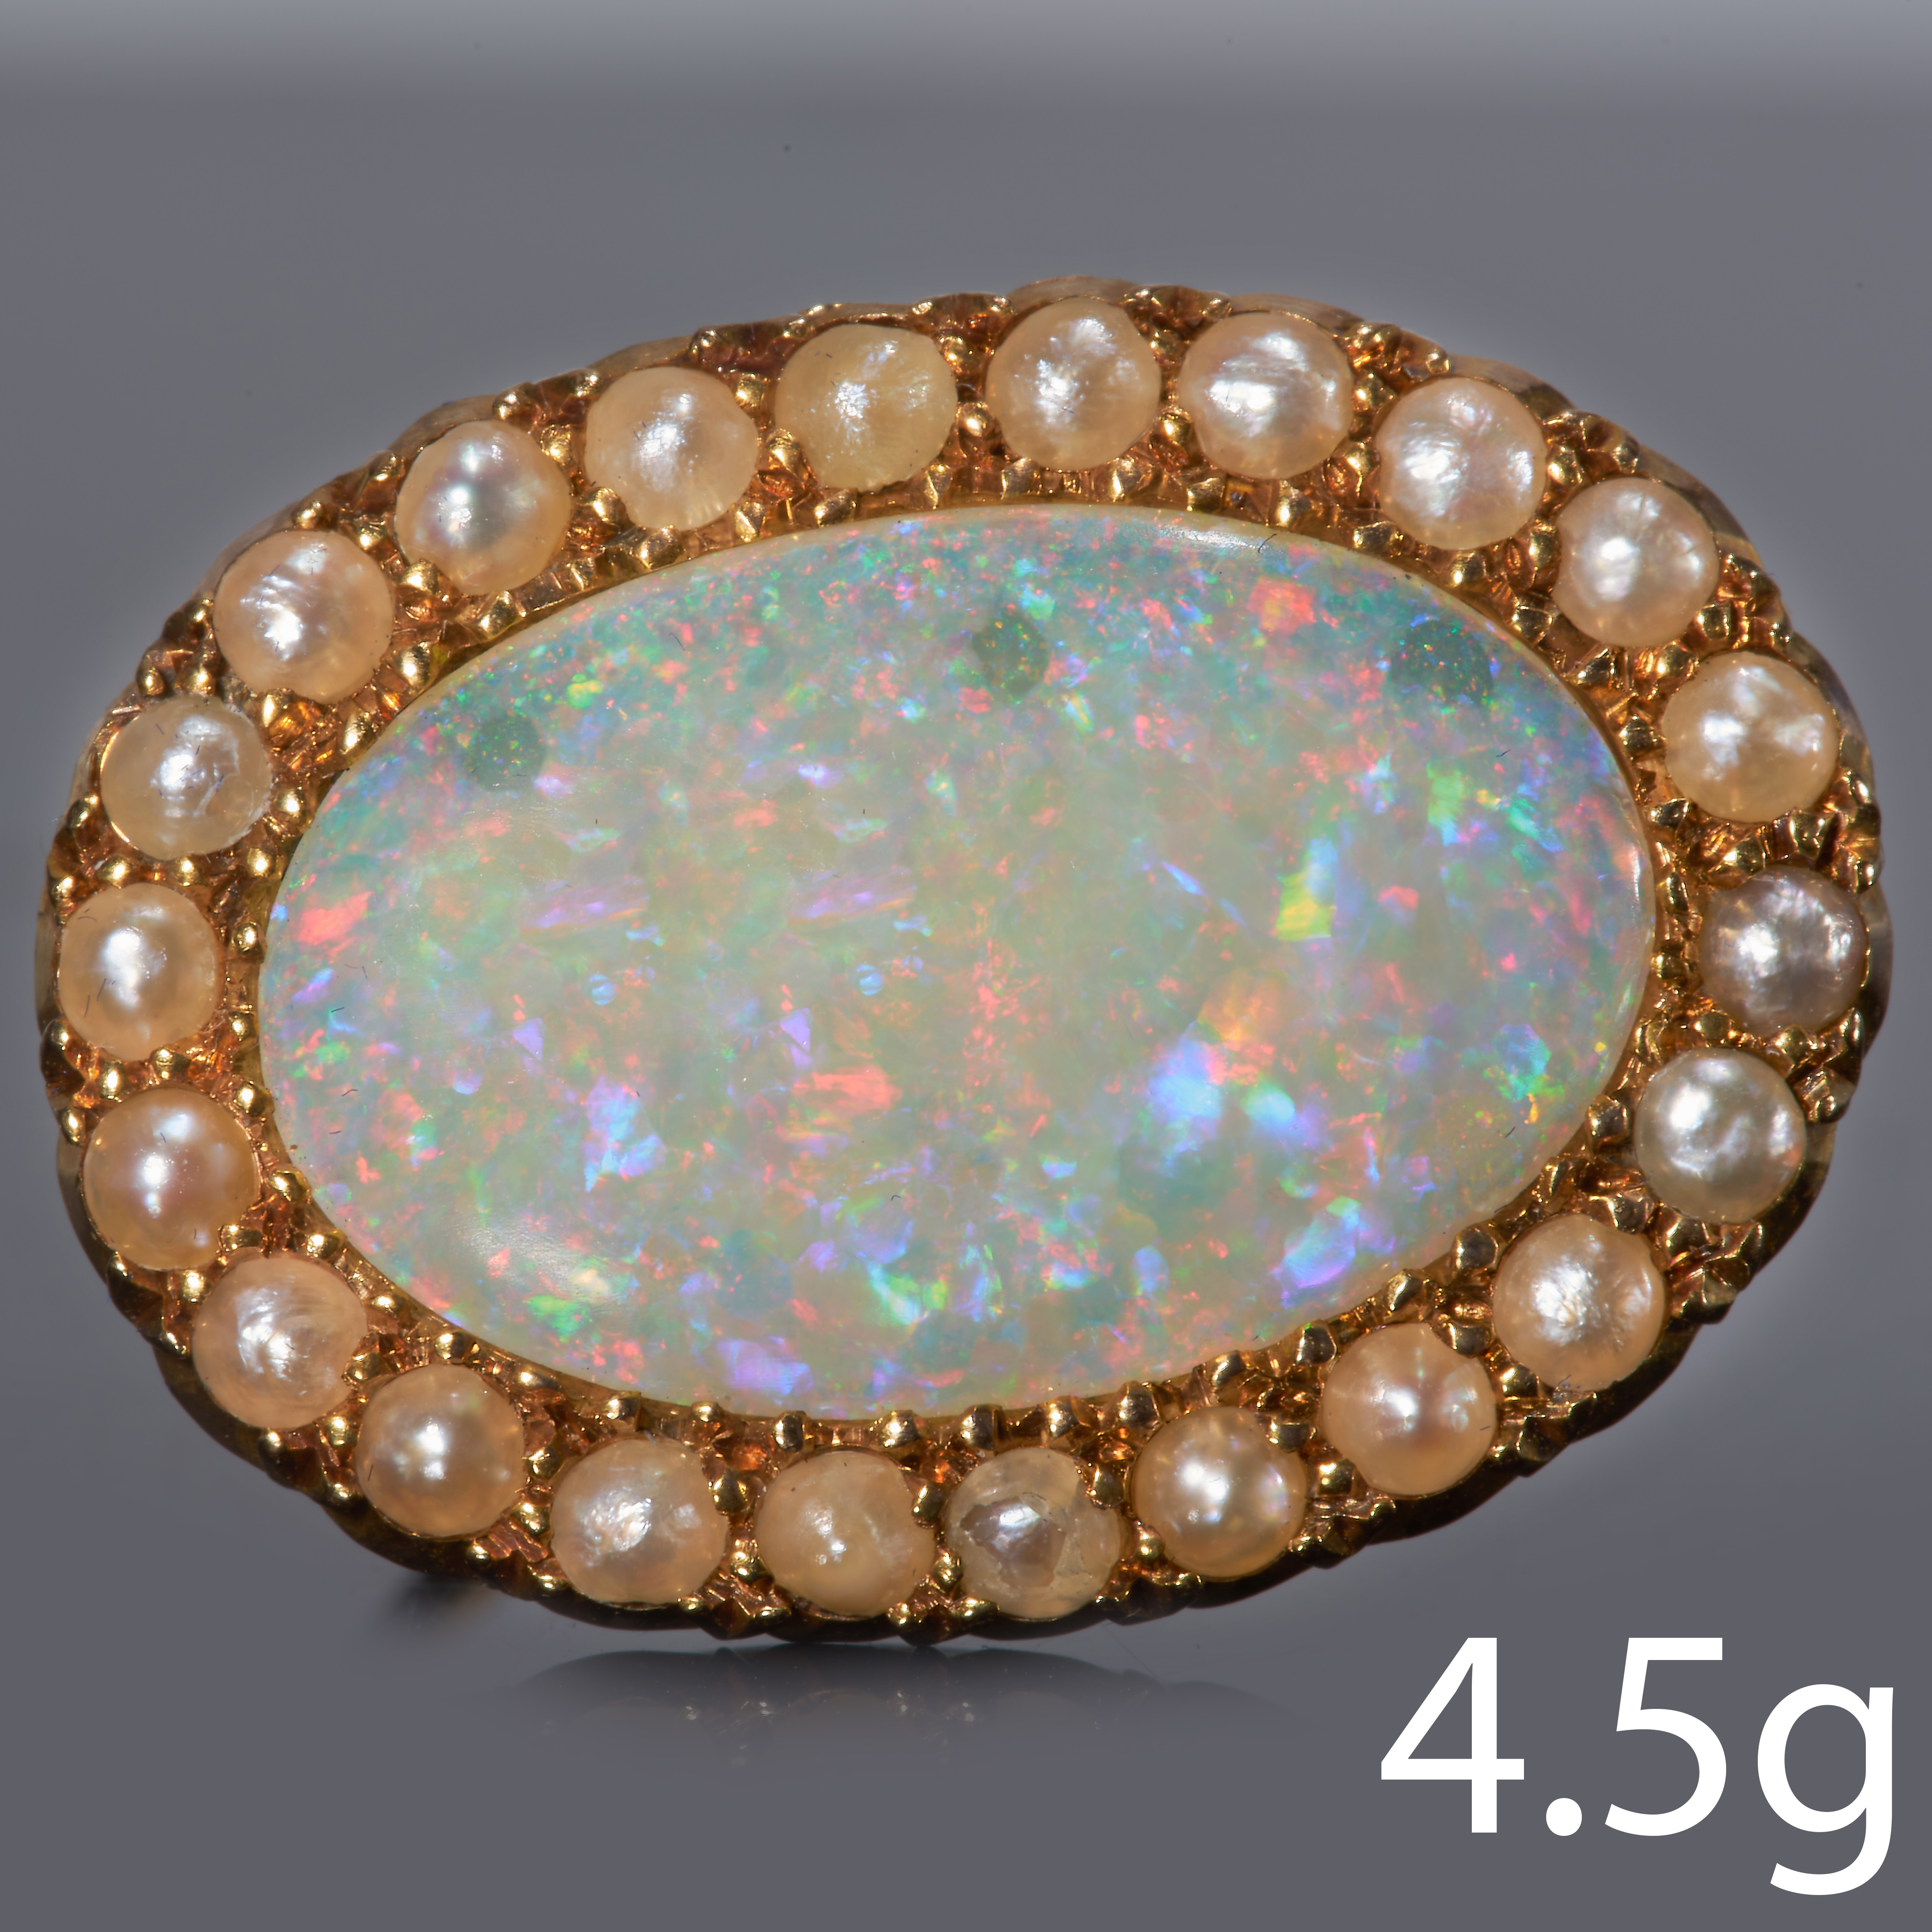 FINE OPAL AND SEED PEARL GOLD BROOCH